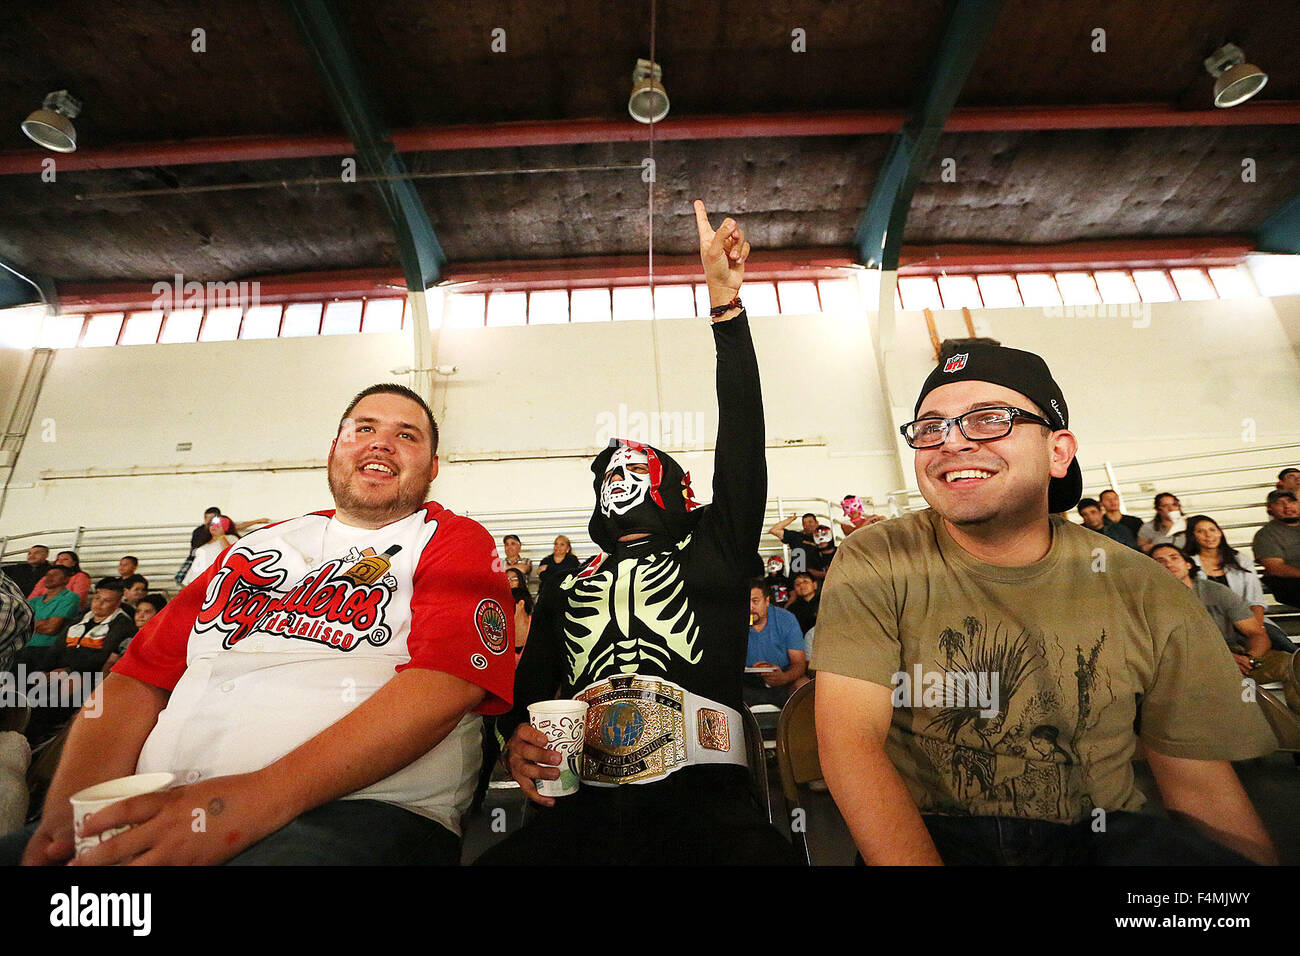 Napa, CA, USA. 17th Oct, 2015. Denny Pena, Alexis Saldivar, dressed as the famed luchador ''la Parka'' and Samuel Urena cheer during the Napa Lucha Libre at the Expo on Saturday night. © Napa Valley Register/ZUMA Wire/Alamy Live News Stock Photo